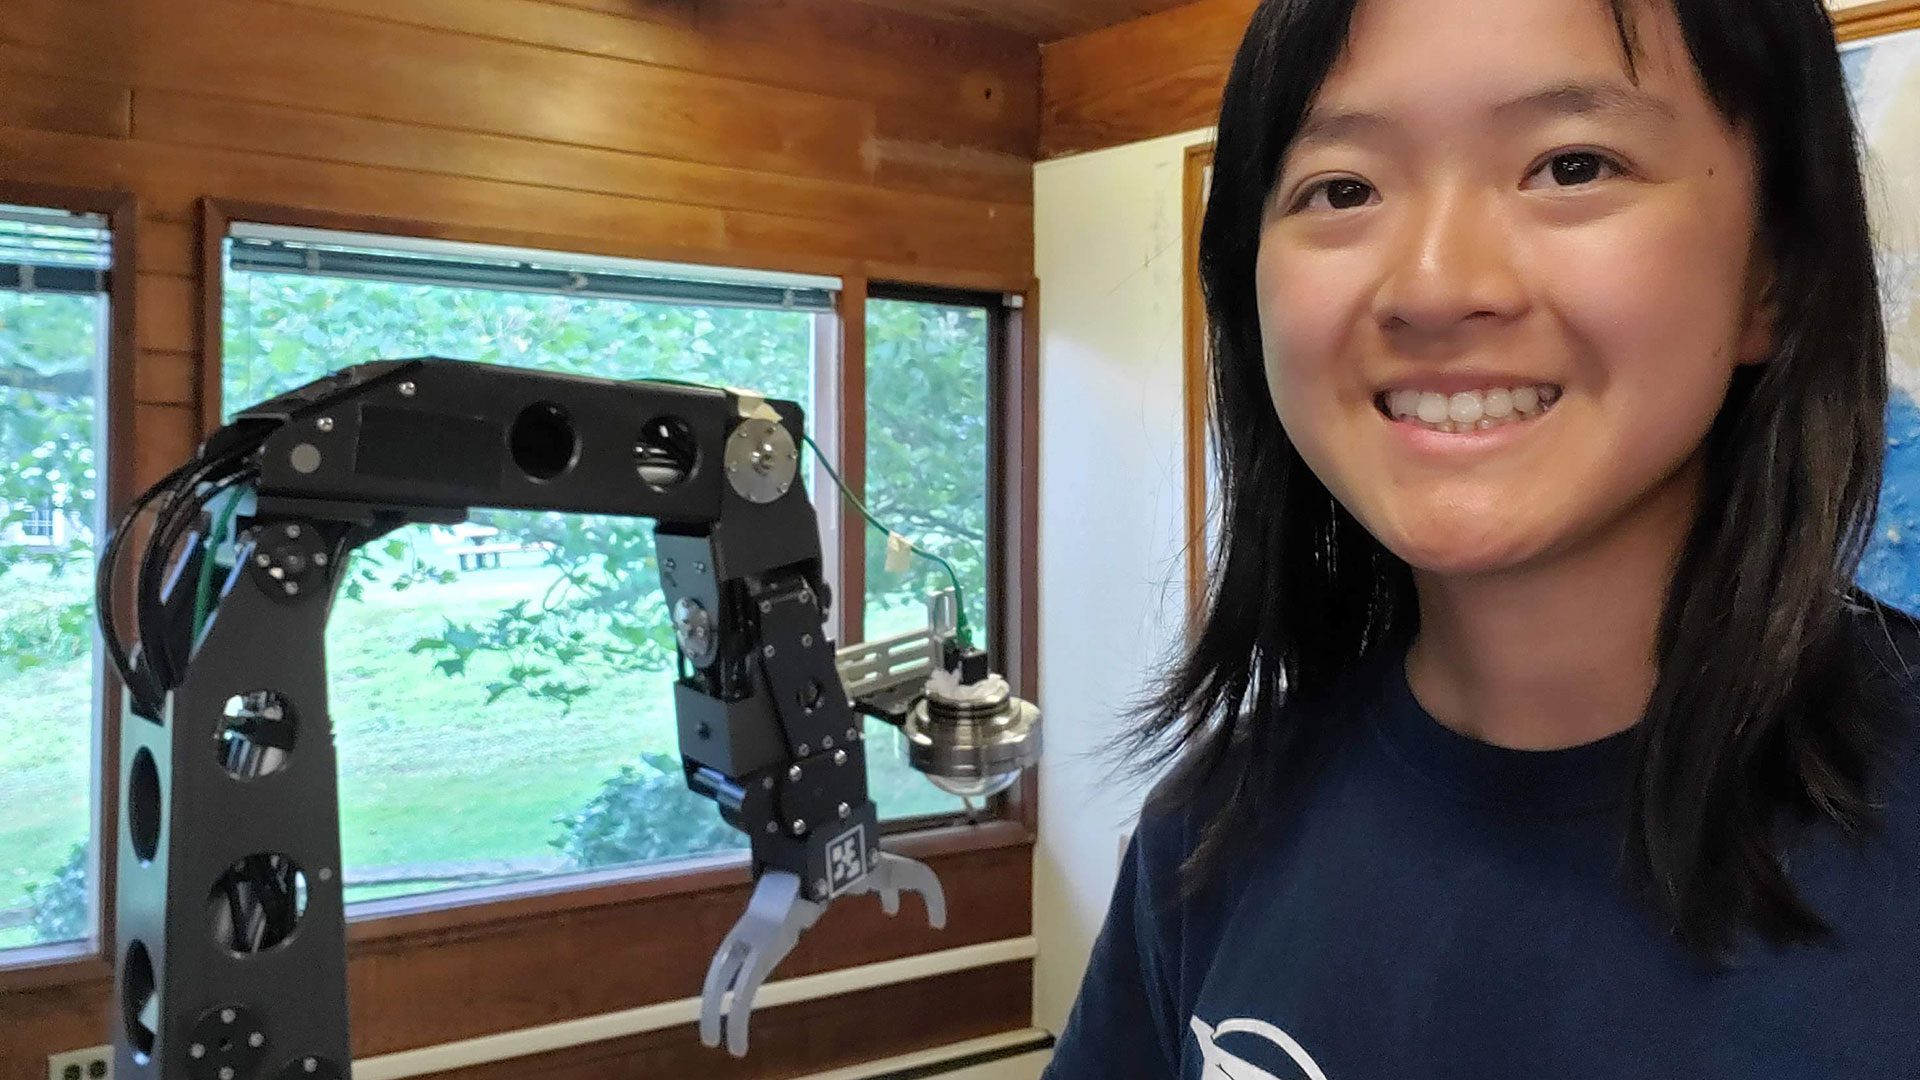 Phung poses with a hydraulic manipulator arm she was developing with the remote interface in the summer of 2021. (Photo courtesy of Amy Phung, © Woods Hole Oceanographic Institution)